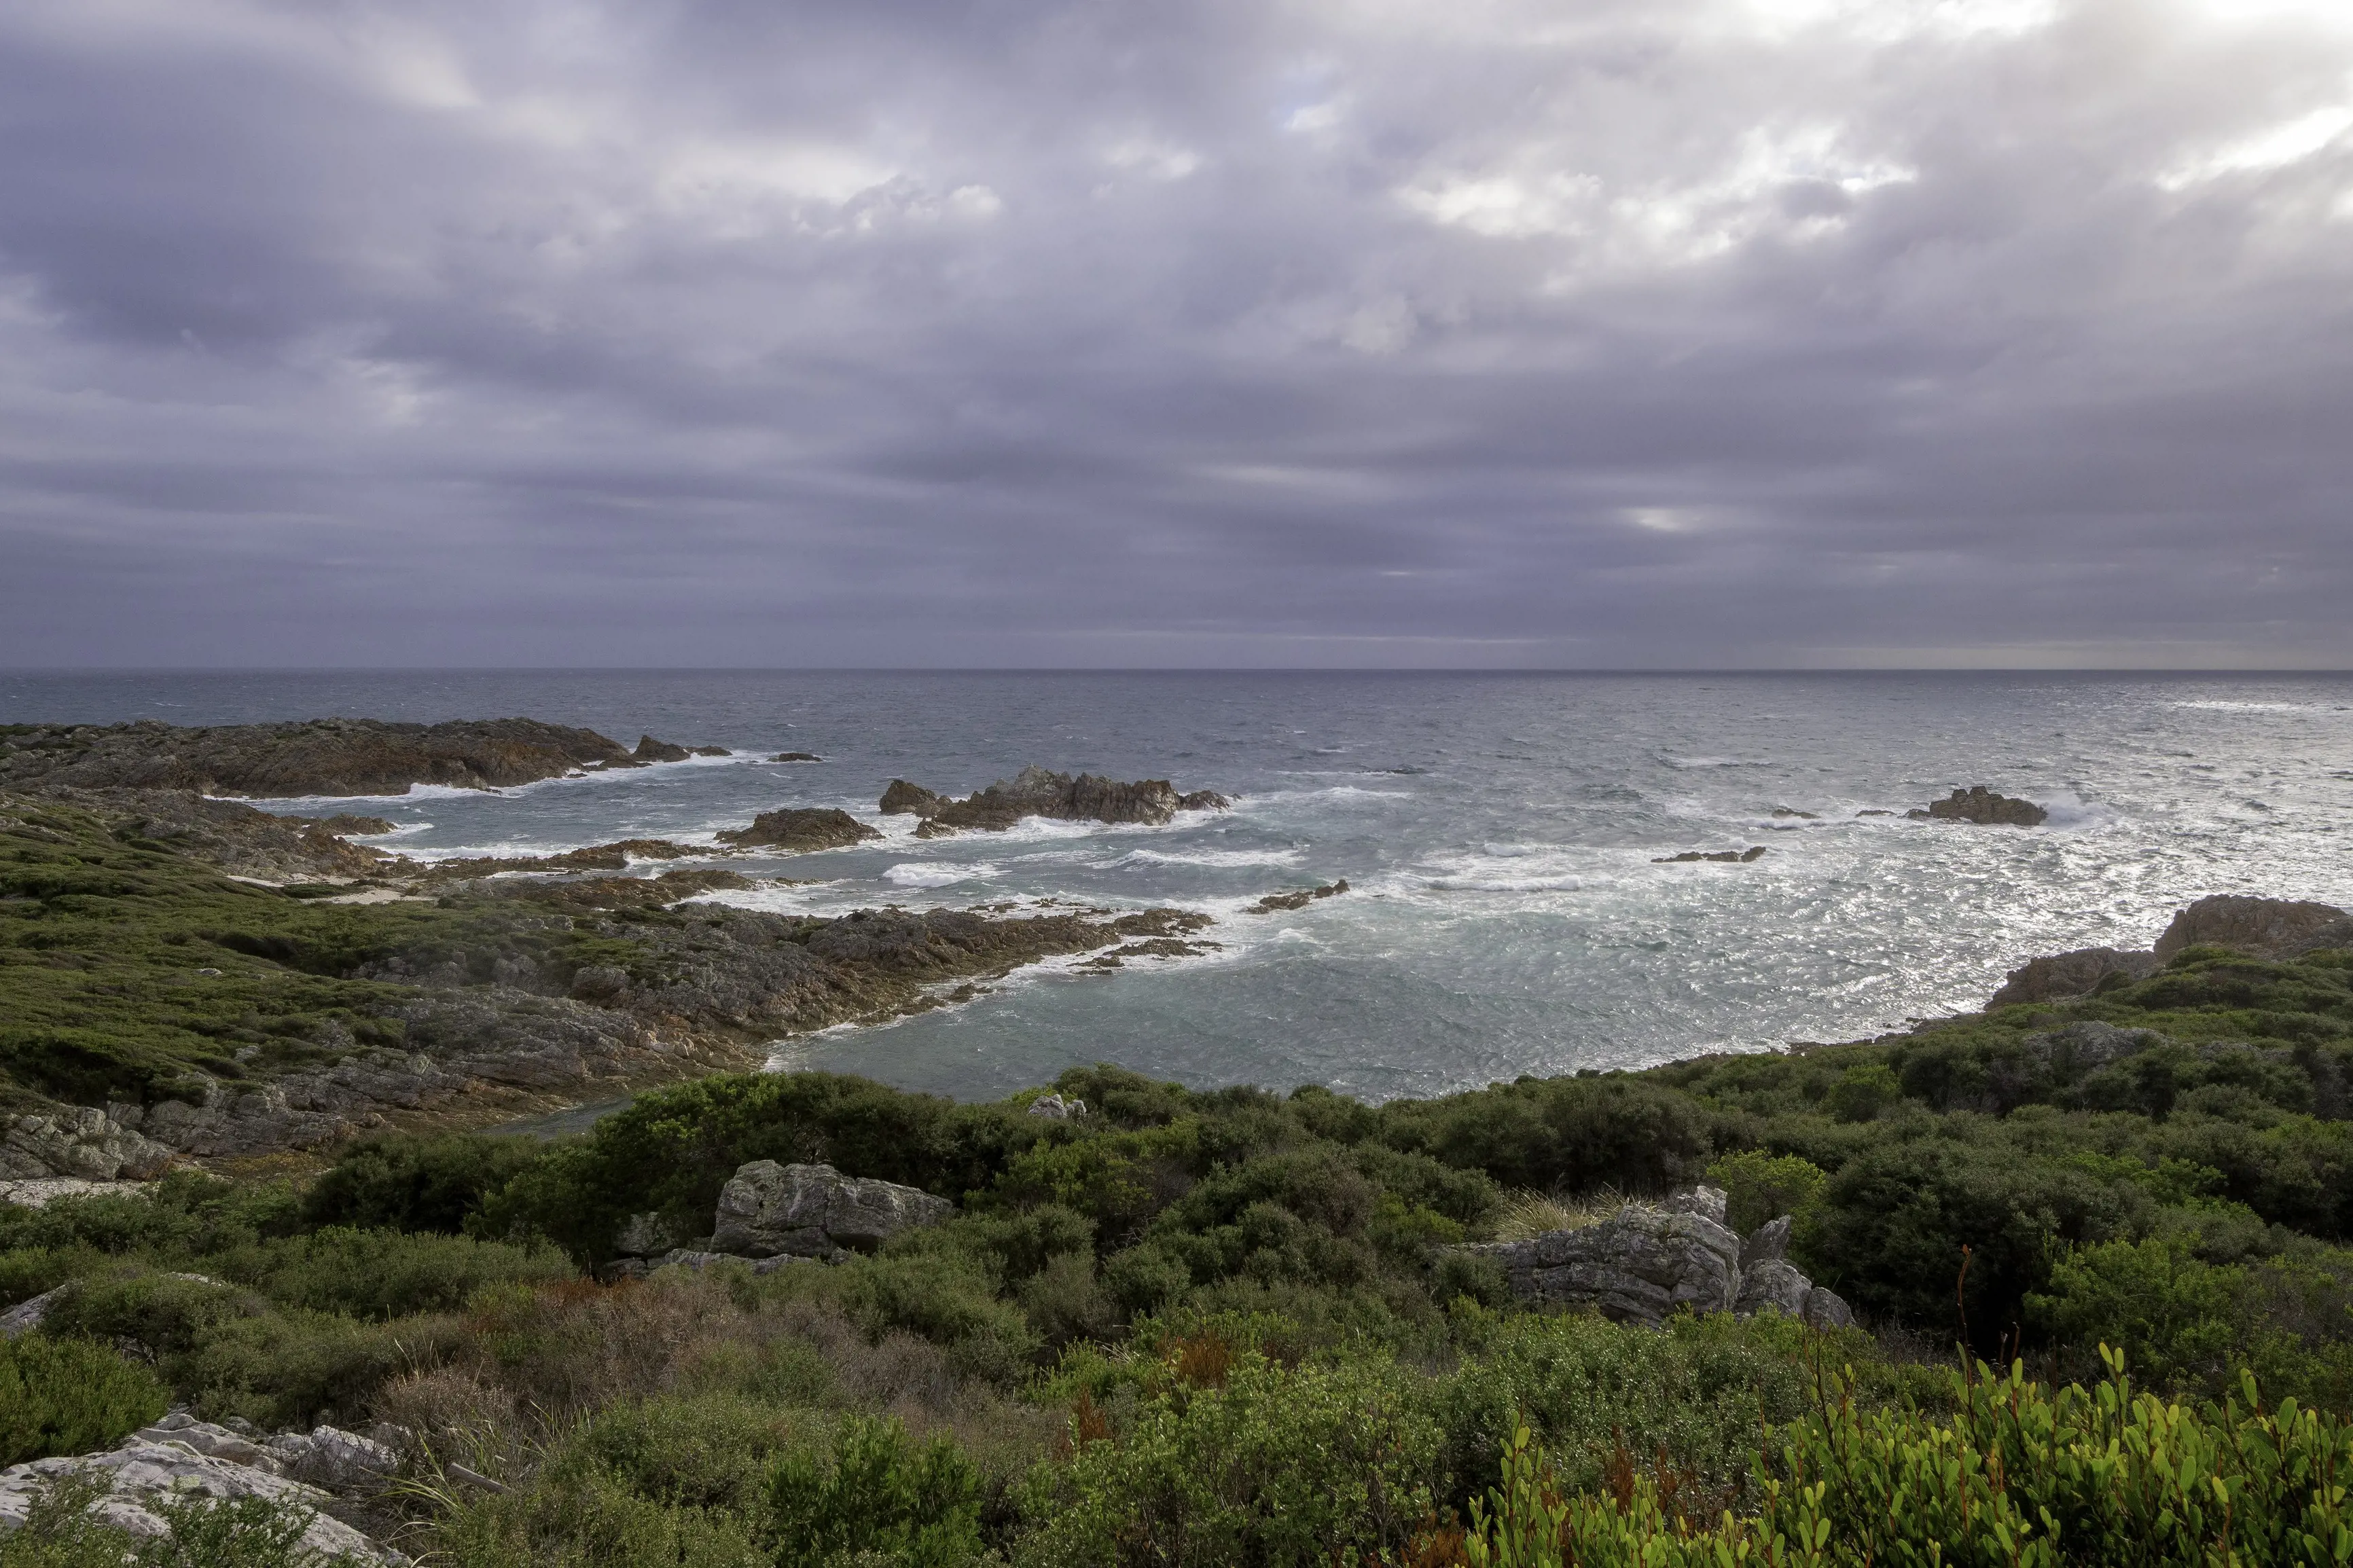 Stunning image of the Rocky Cape National Park coastline. Surrounded by bush and rocks that lead to the ocean.